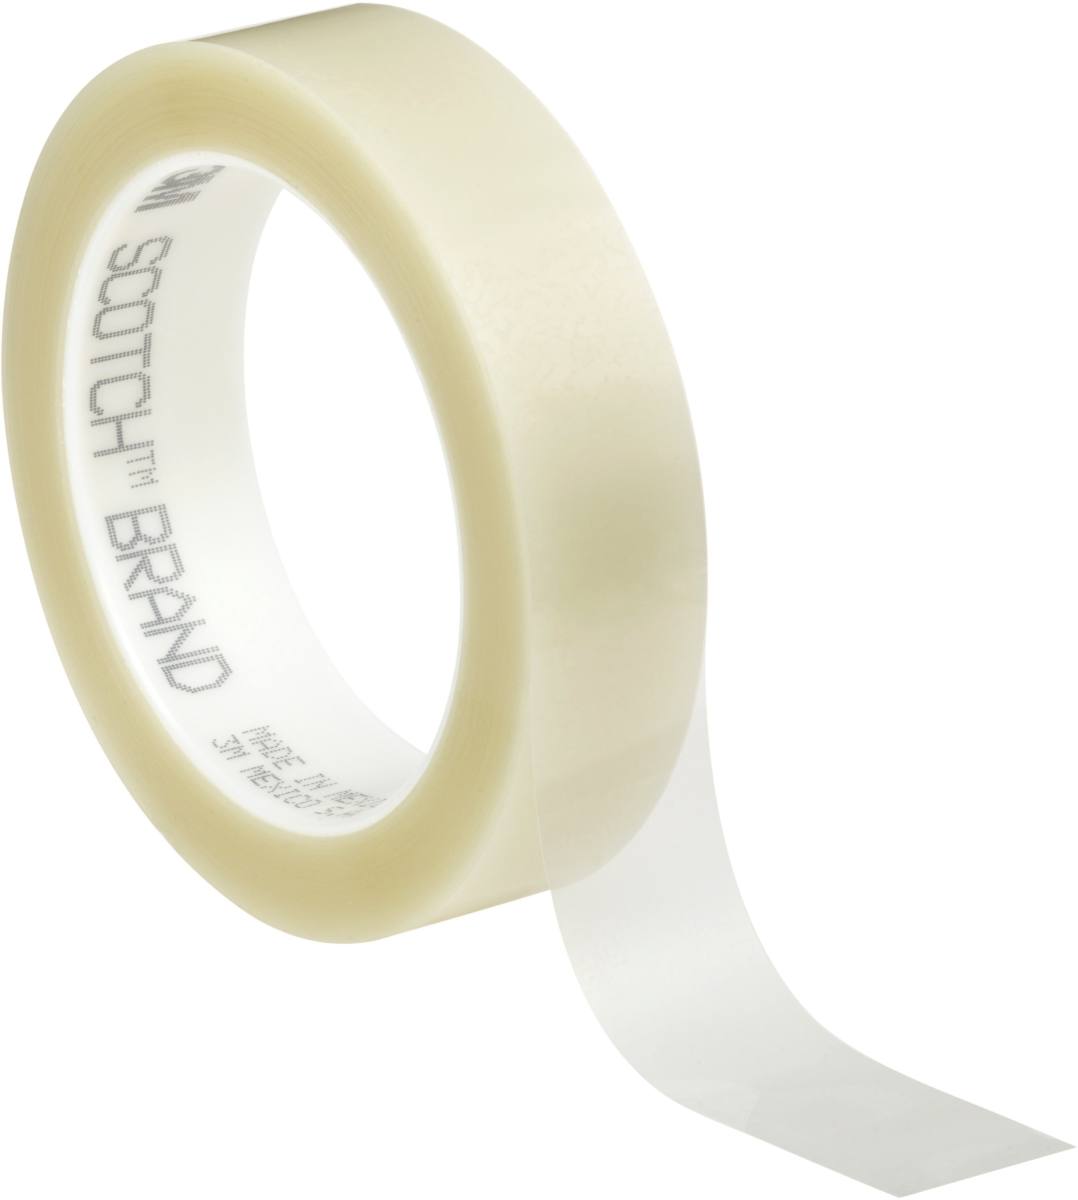 3M polyester adhesive tape 850 T, transparent, 19 mm x 66 m, 0.05 mm